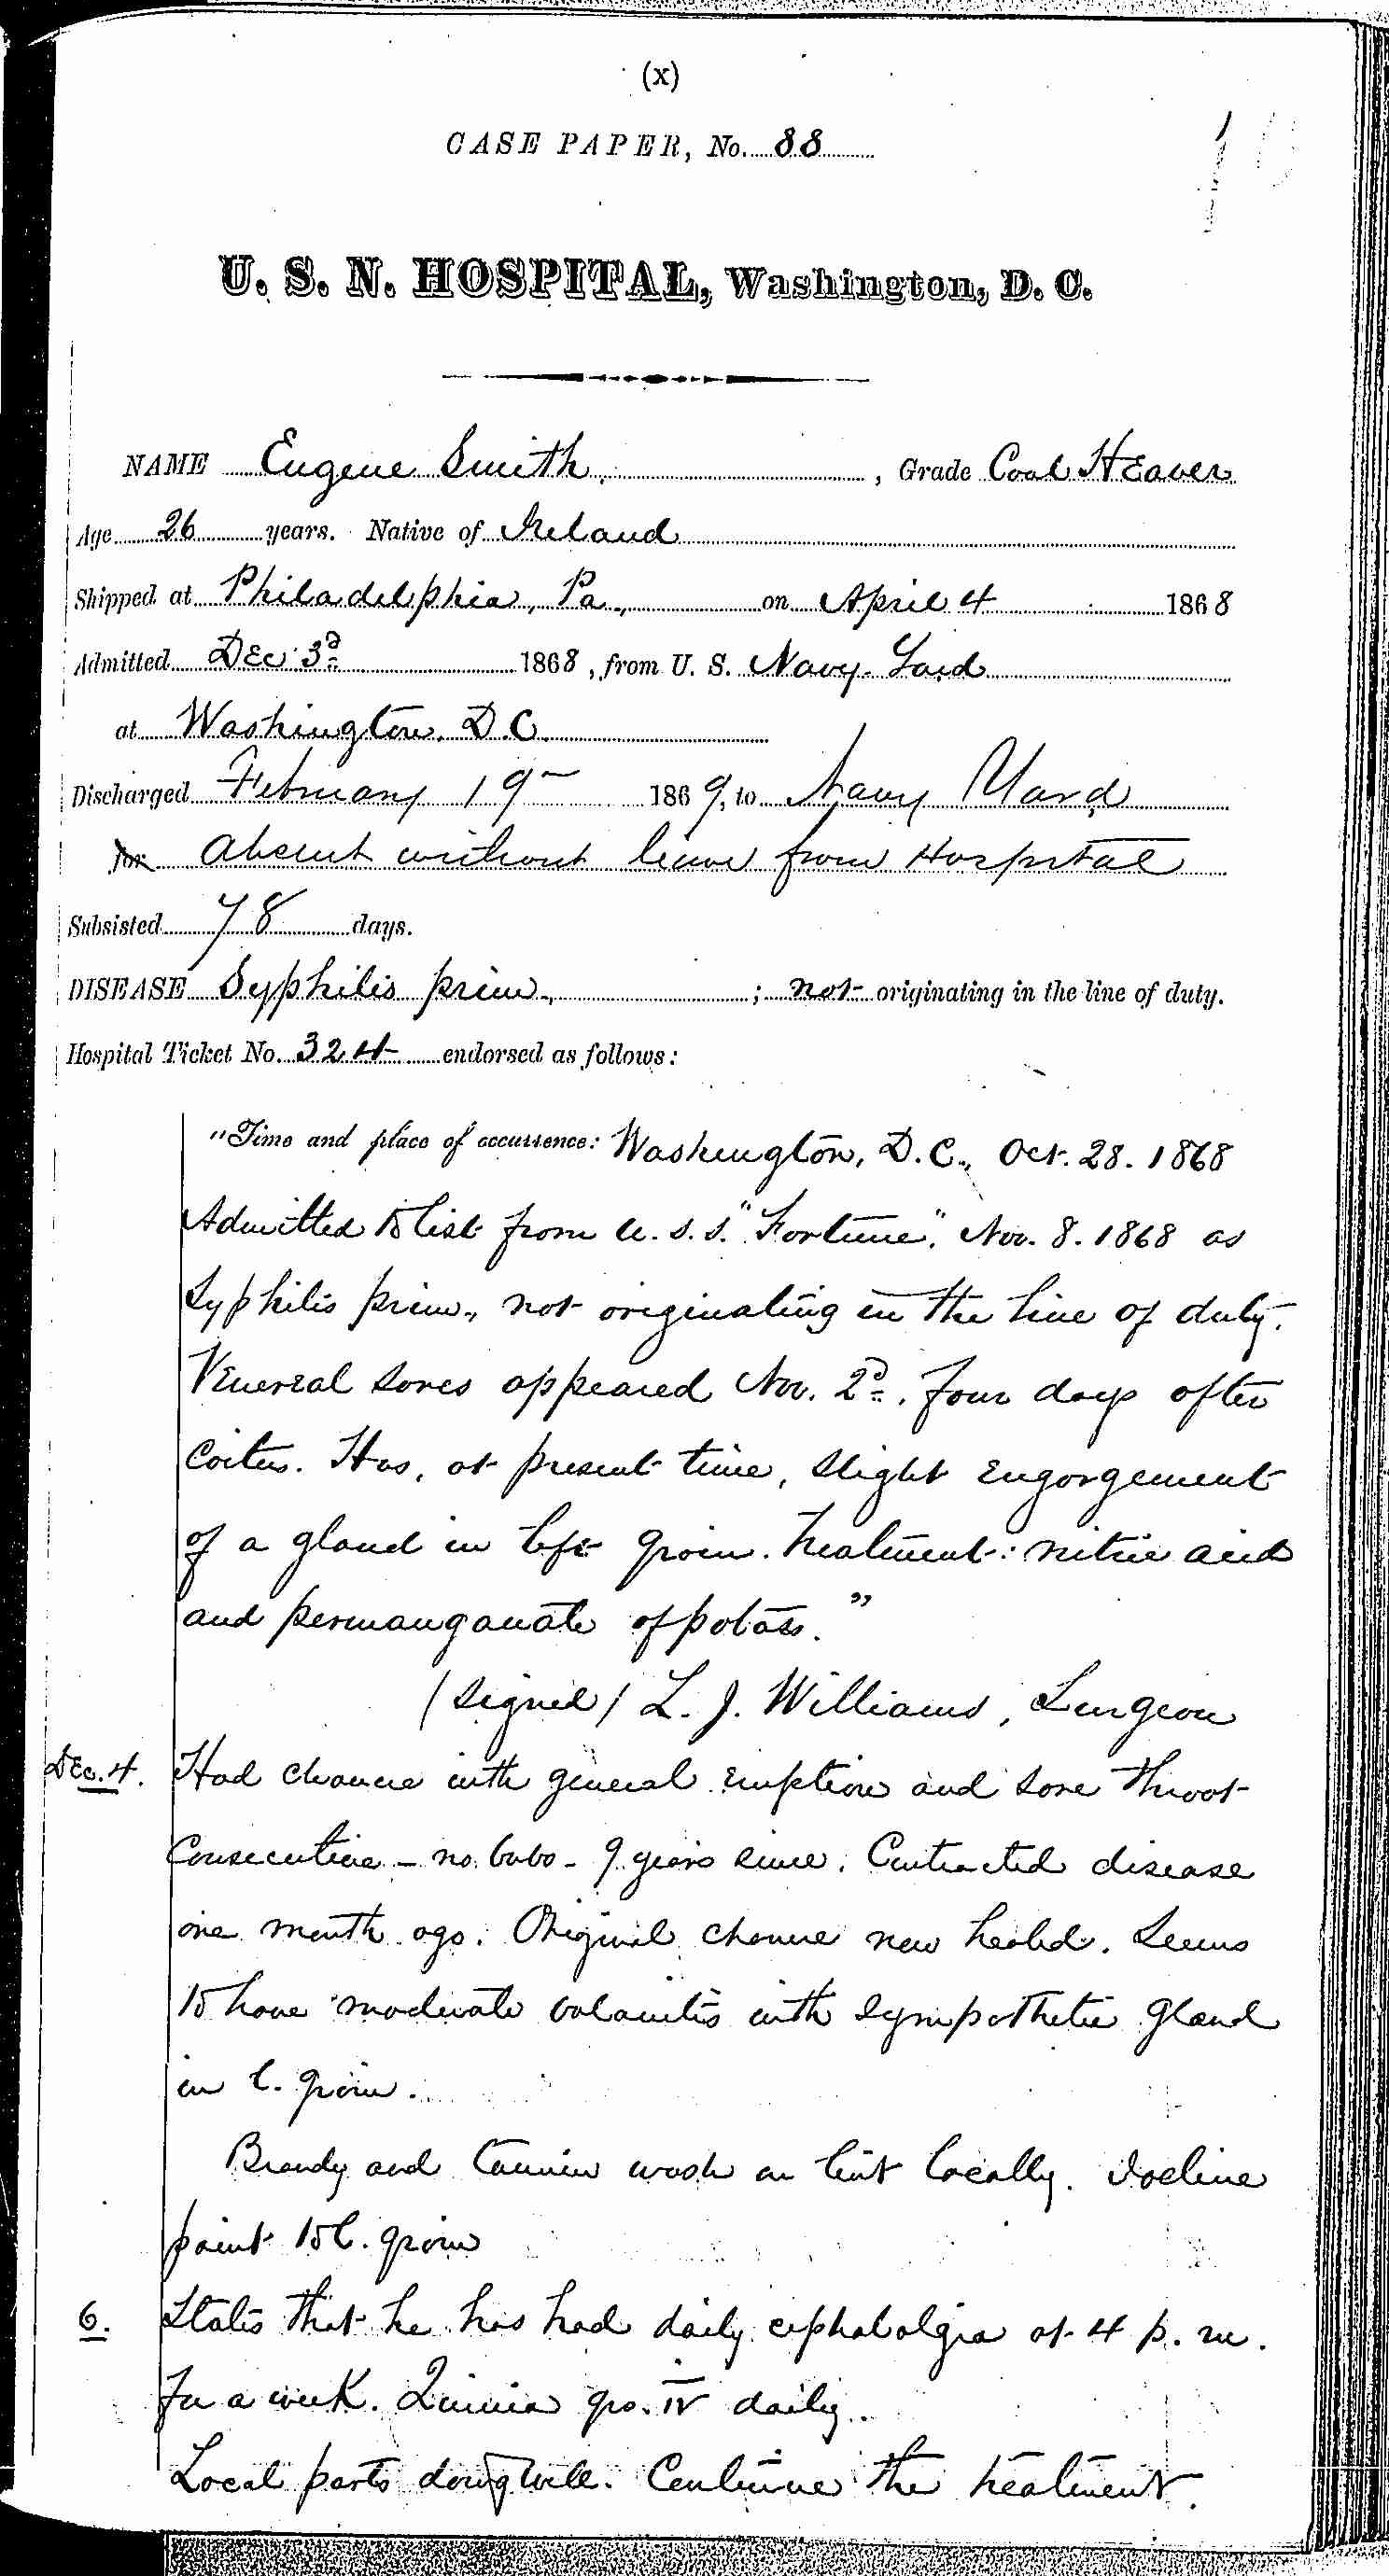 Entry for Eugene Smith (page 1 of 6) in the log Hospital Tickets and Case Papers - Naval Hospital - Washington, D.C. - 1868-69